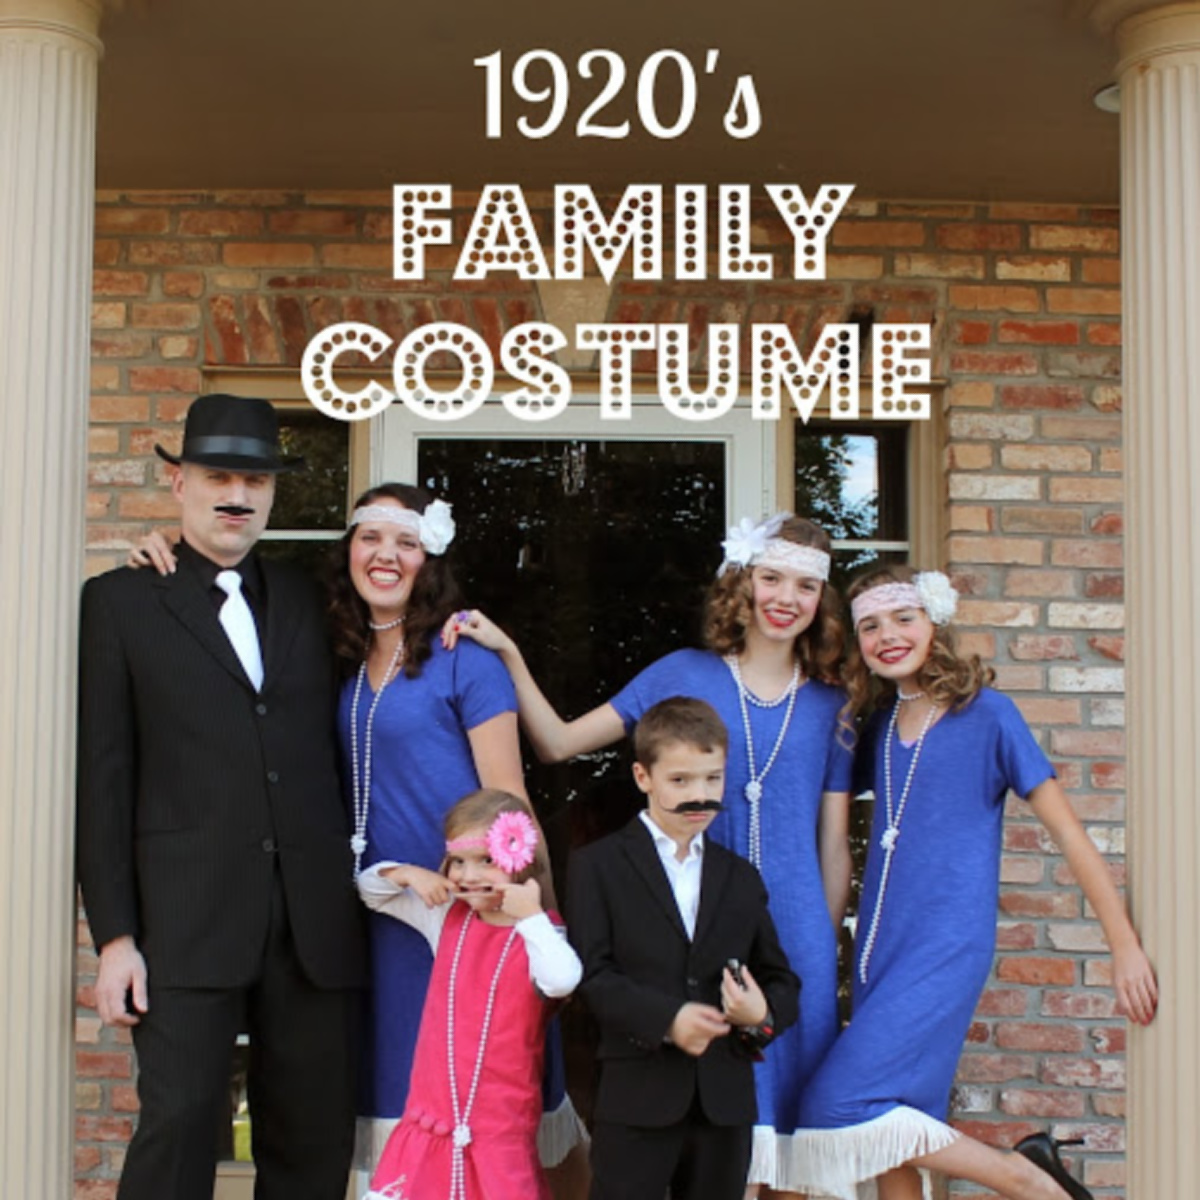 Dress up ideas- 1920s costume for whole family- kids activities blog